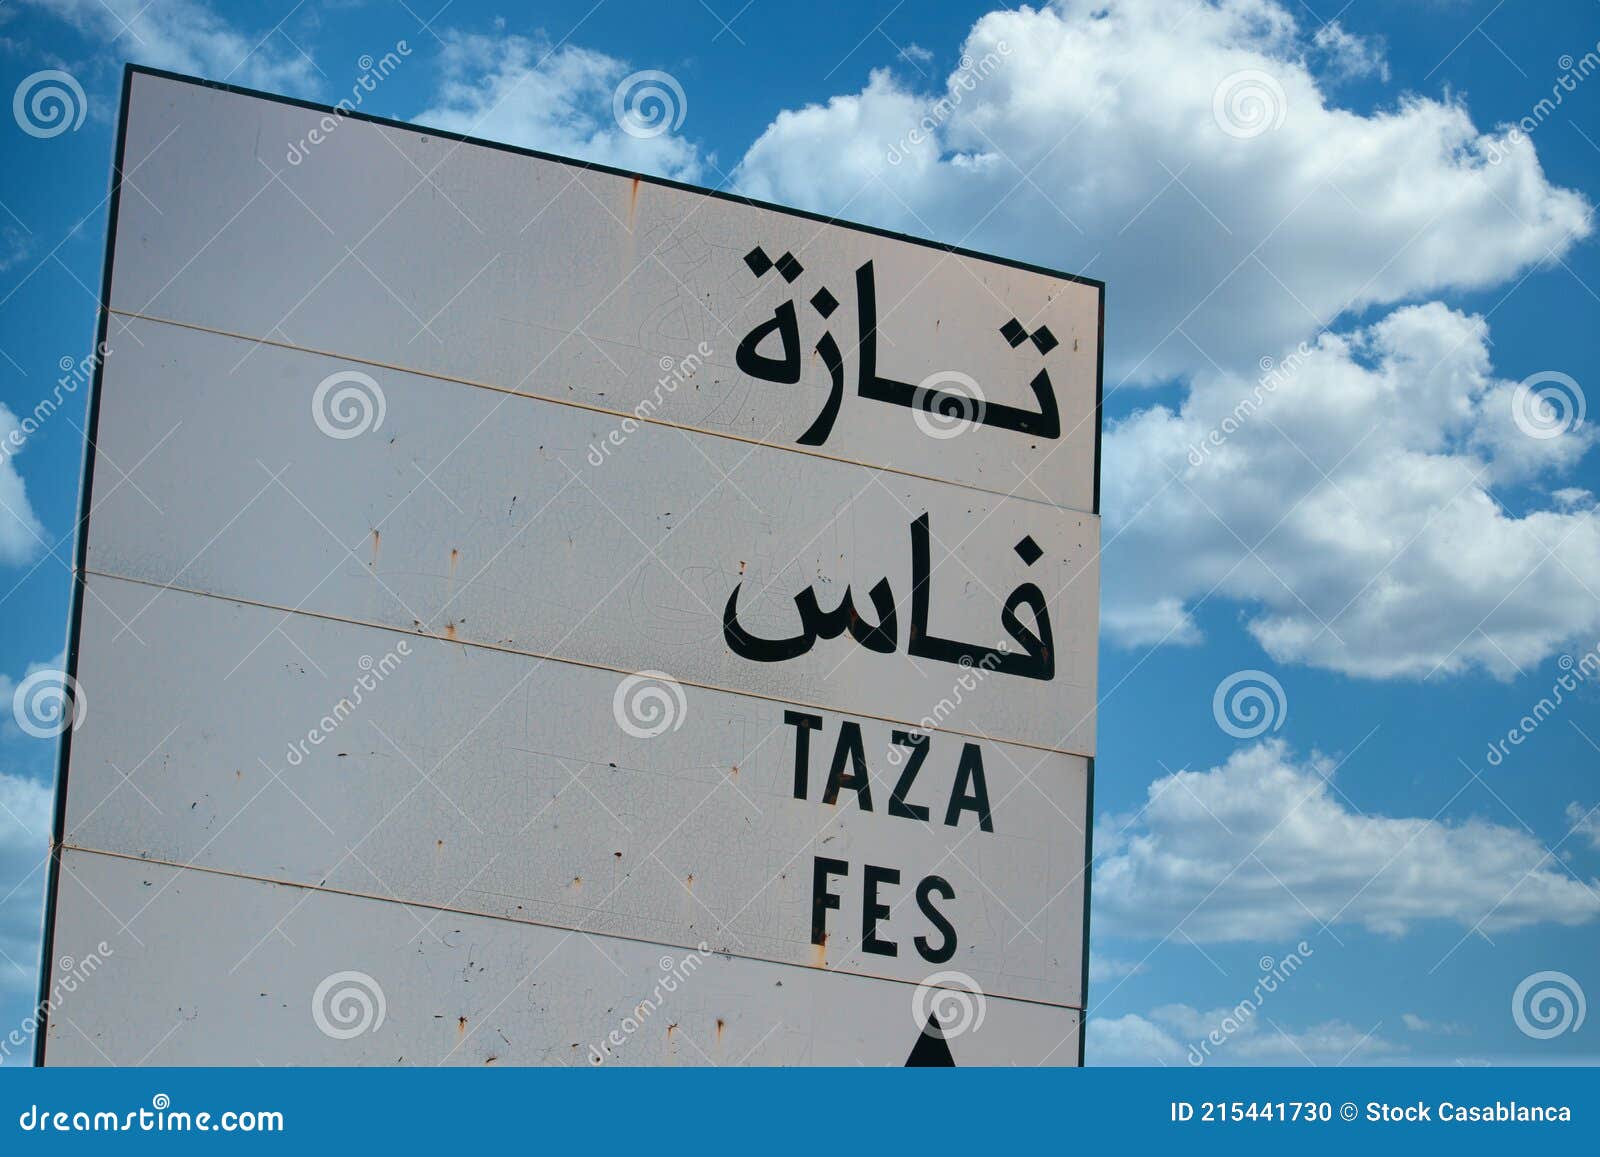 city guides panel. fes and taza highway in morocco. translation: fez-taza